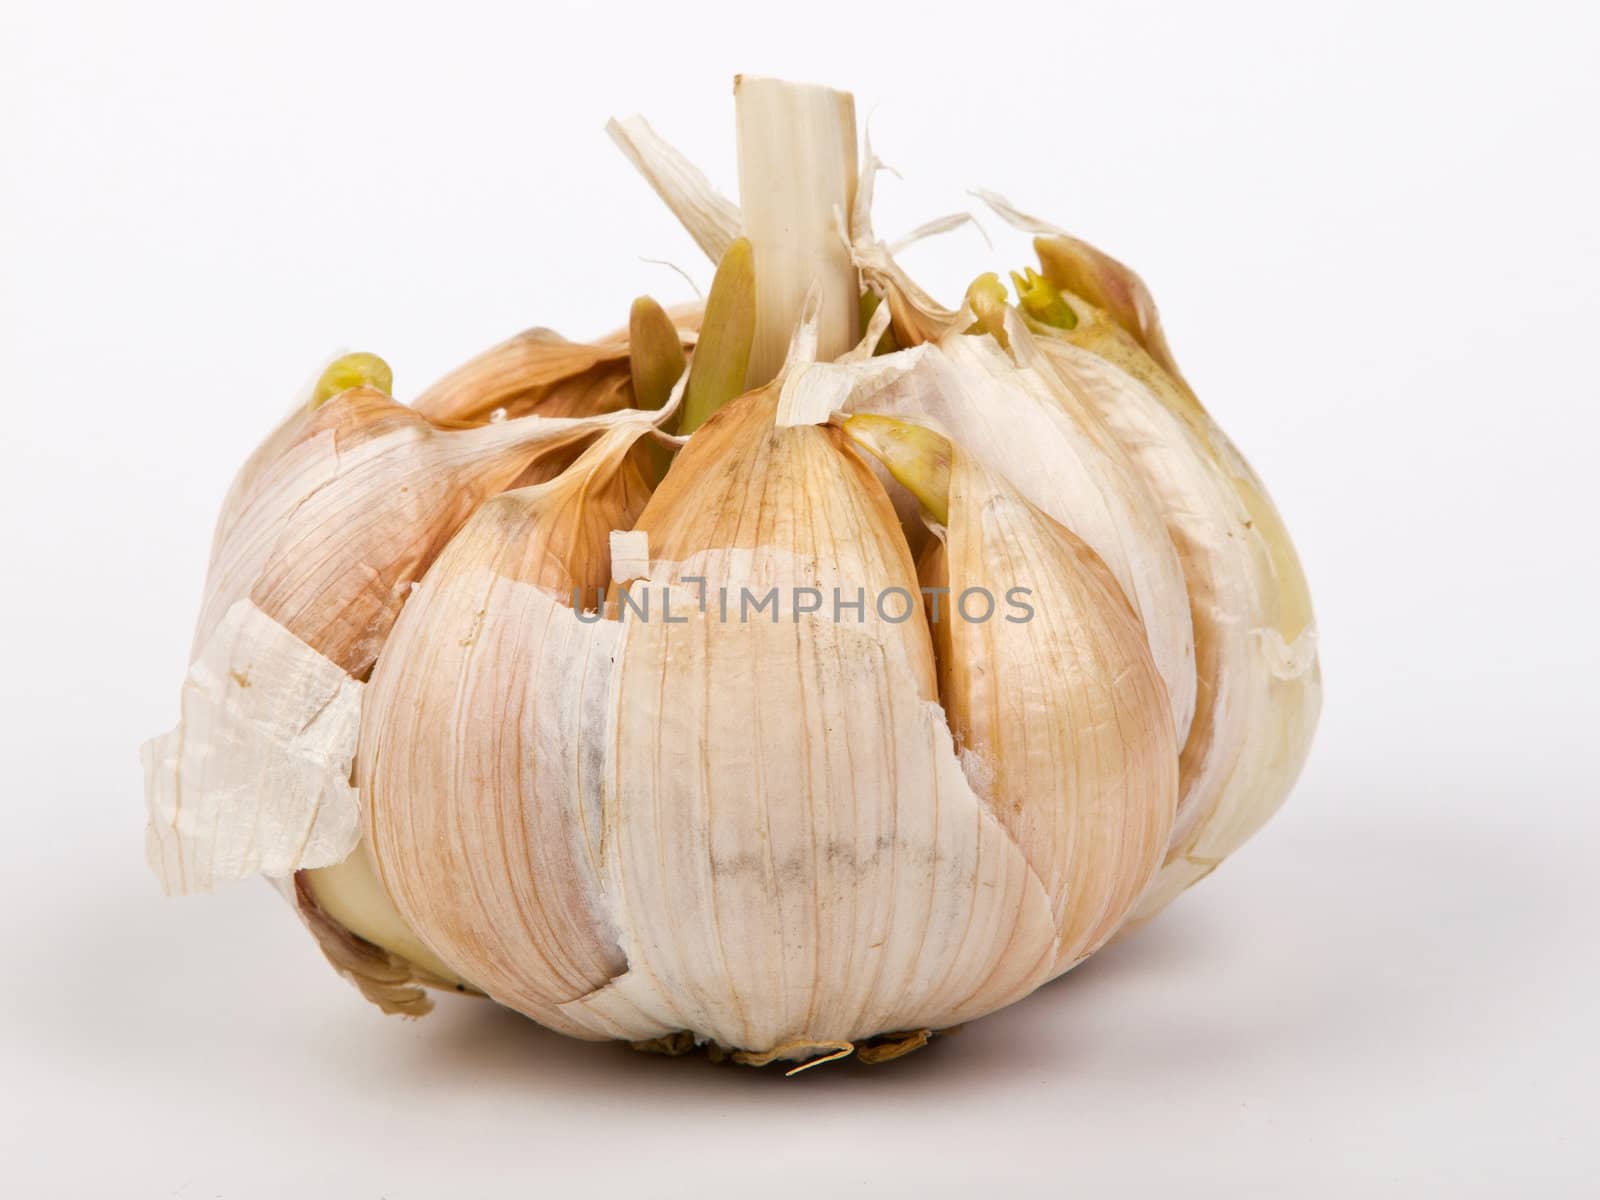 garlic with green buds isolated on white background